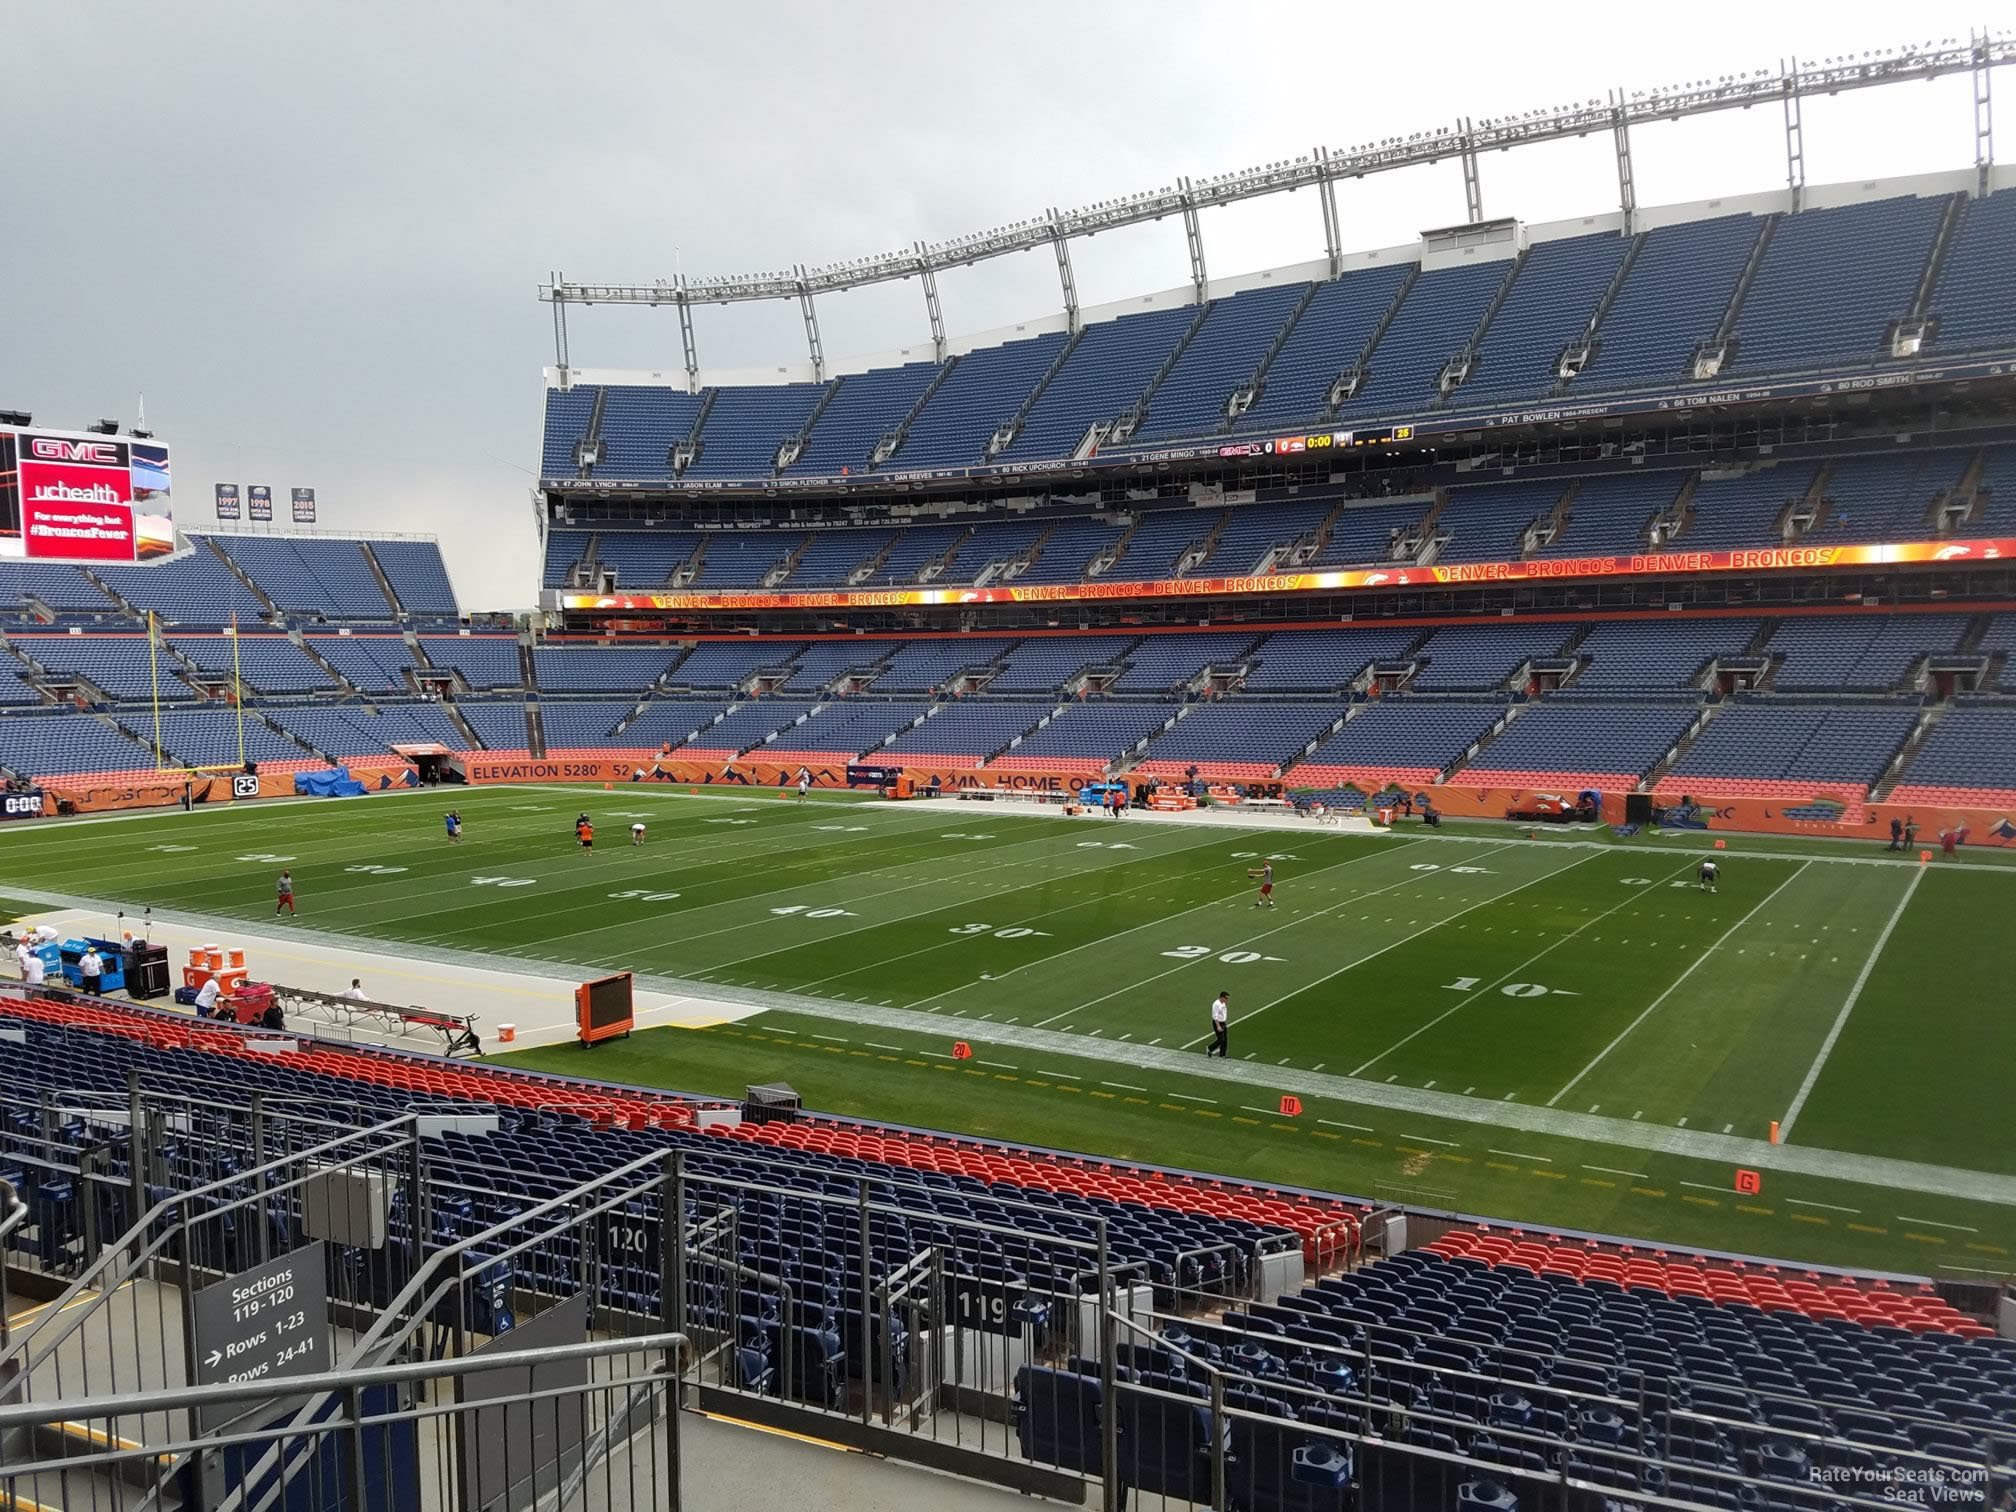 section 119, row 30 seat view  - empower field (at mile high)